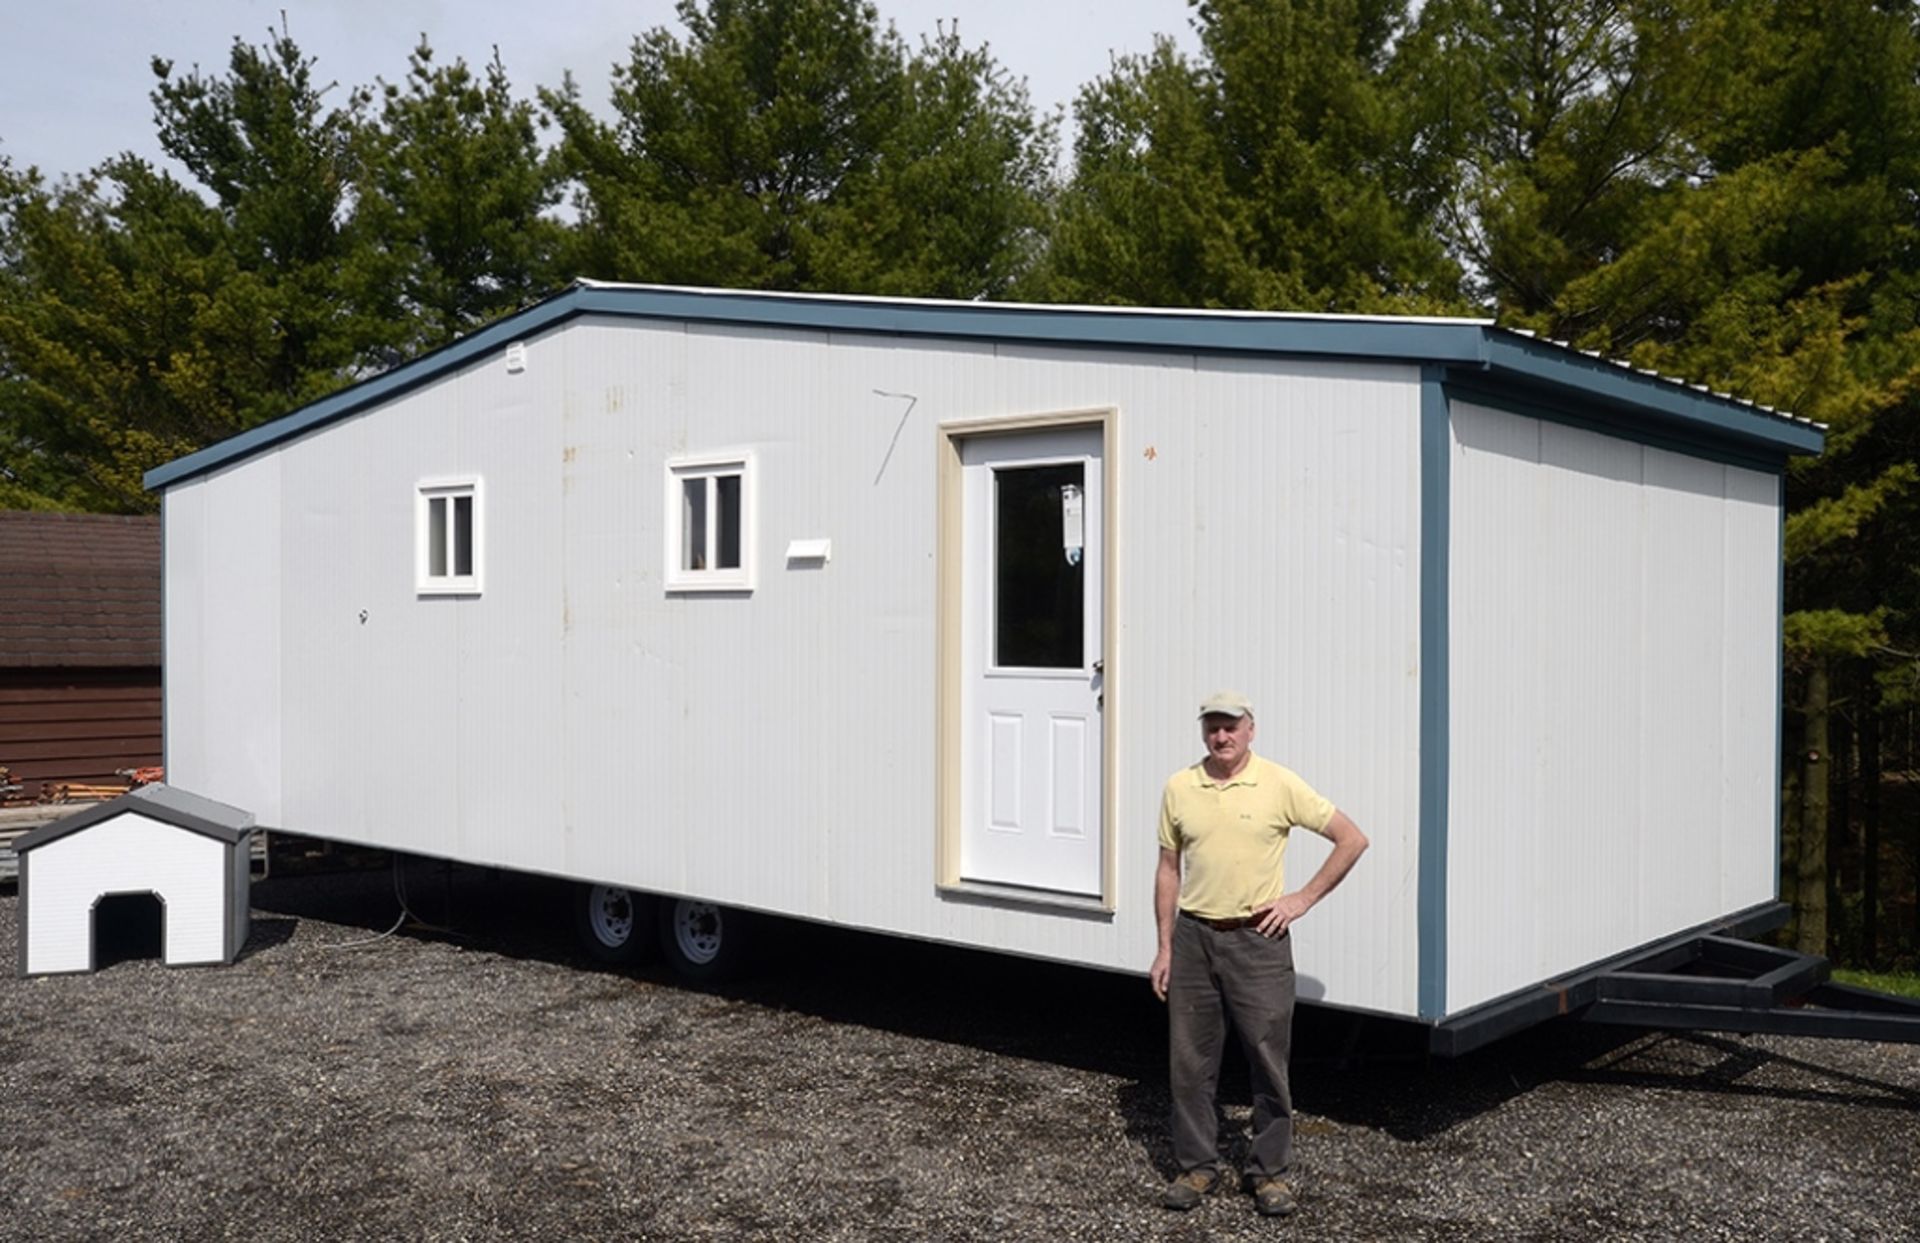 BRAND NEW 14' X 34' TIMBERSTRUC MOBILE HOME